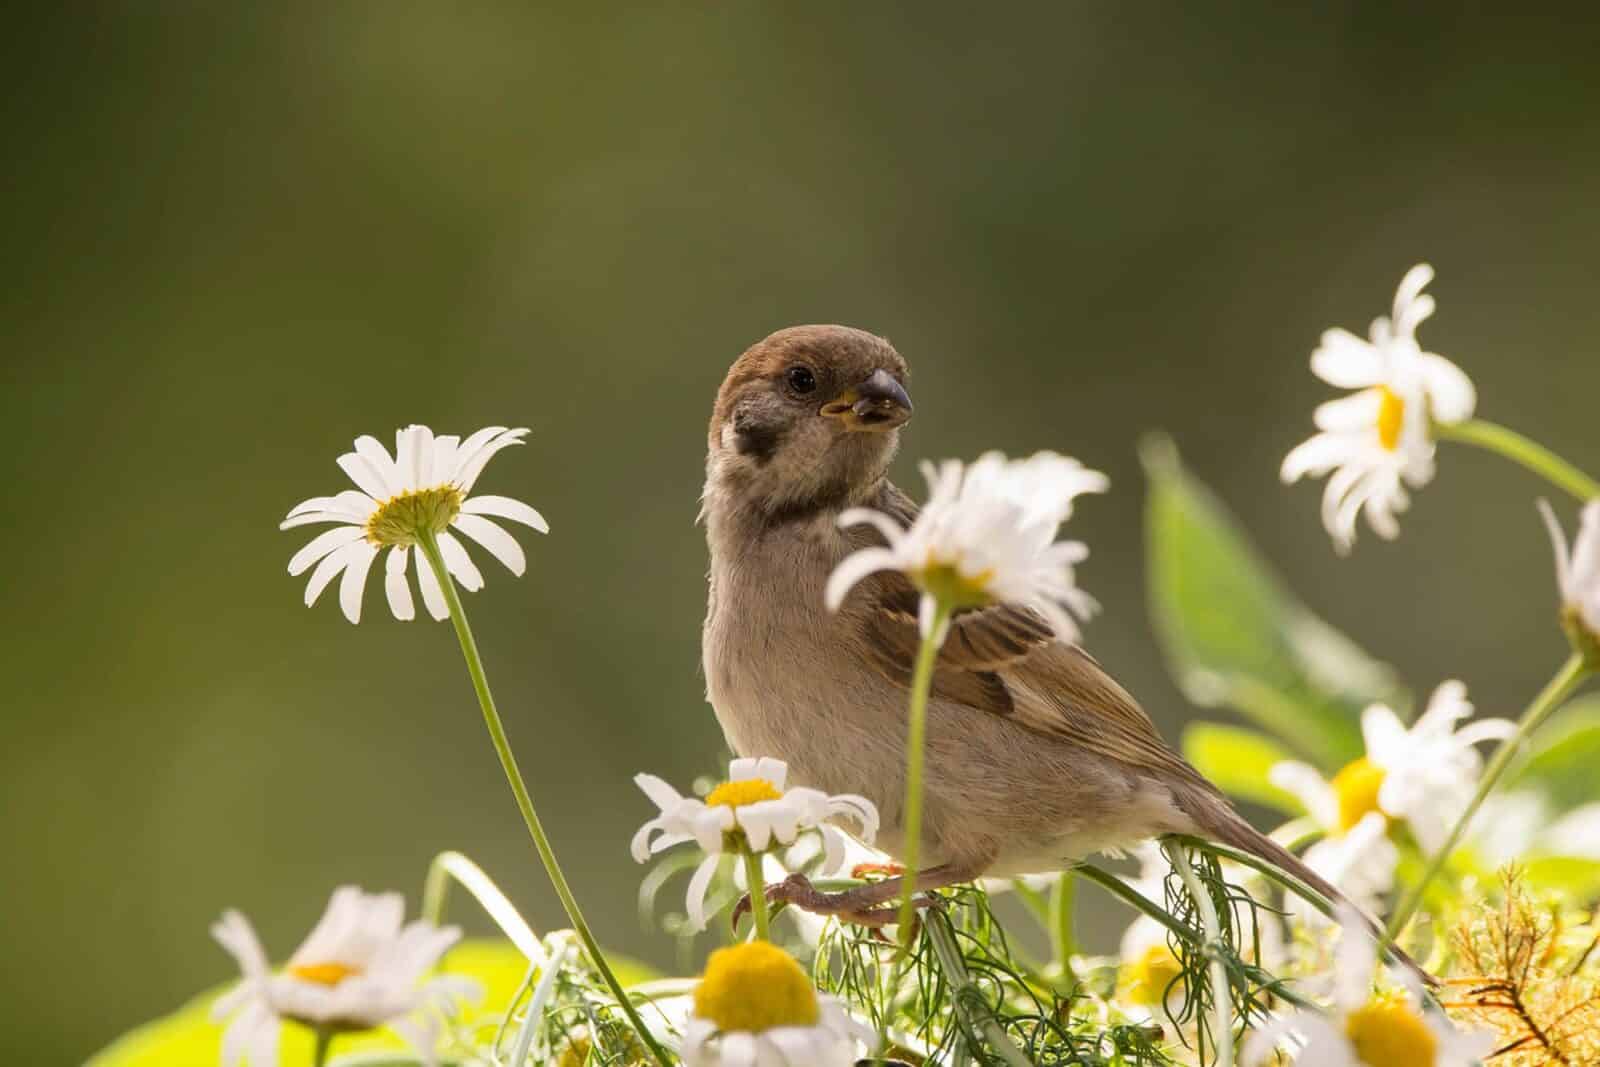 A sparrow in a patch of daises